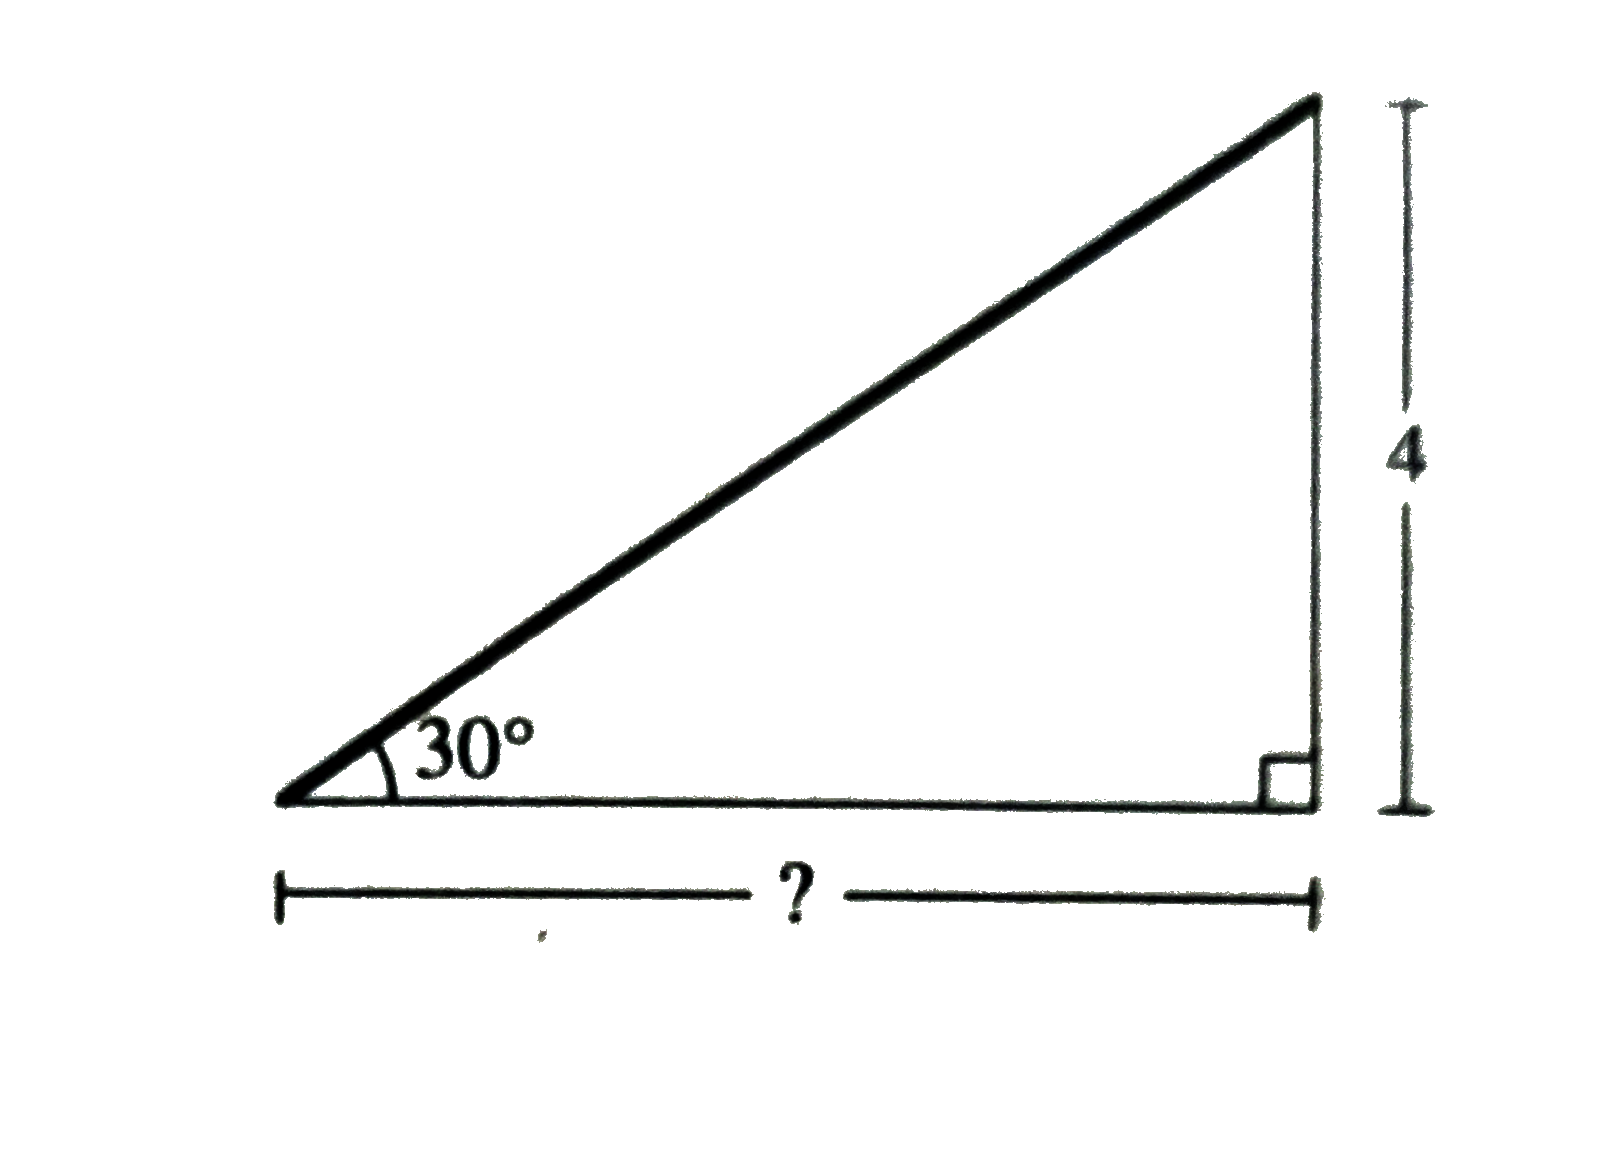 As shown  in the  figure  below , with  angles  as marked ,a  ramp  is being  designed  that will  have  a vertical  height  of  4 feet  . Which  of the  following  is closest  to the  horizontal  length of the  ramp  , in  feet ?